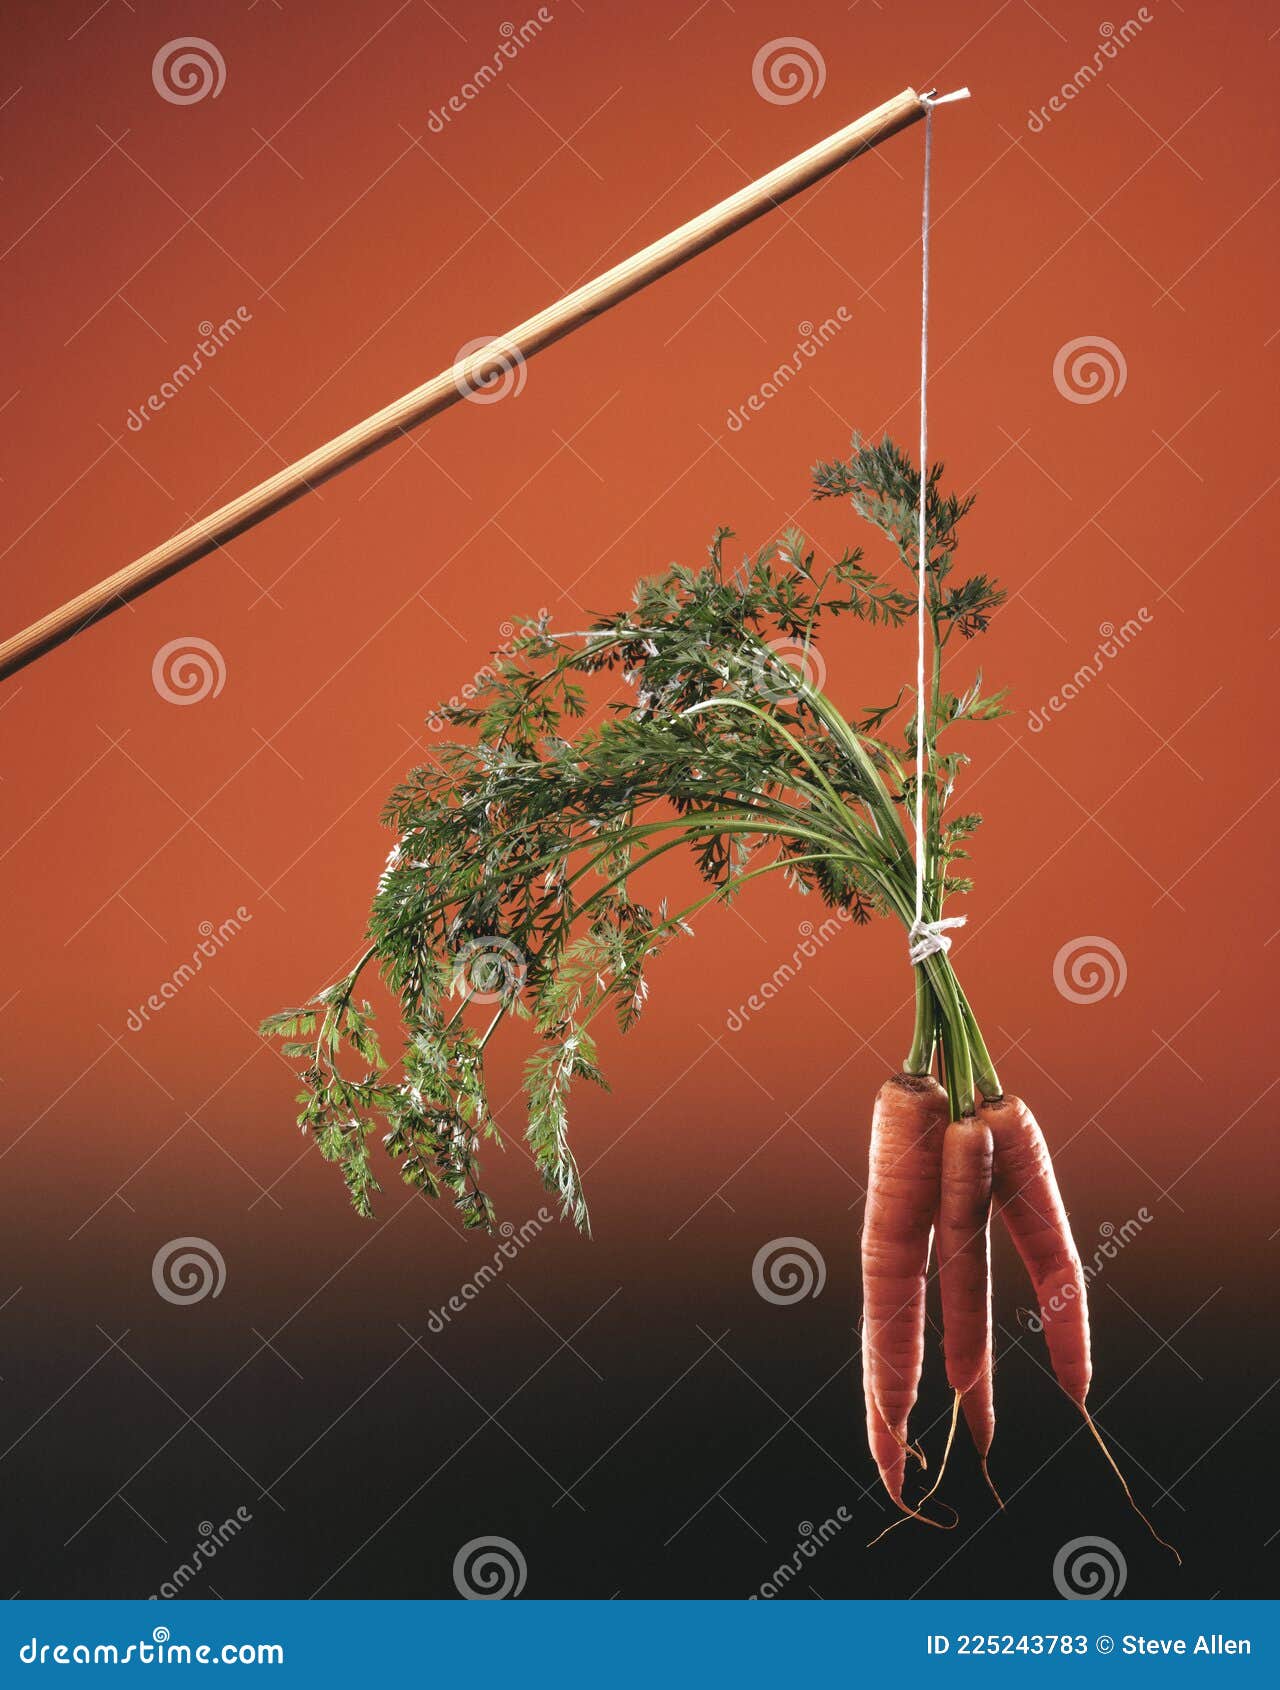 carrot and stick - a metaphor for a method of persuasion